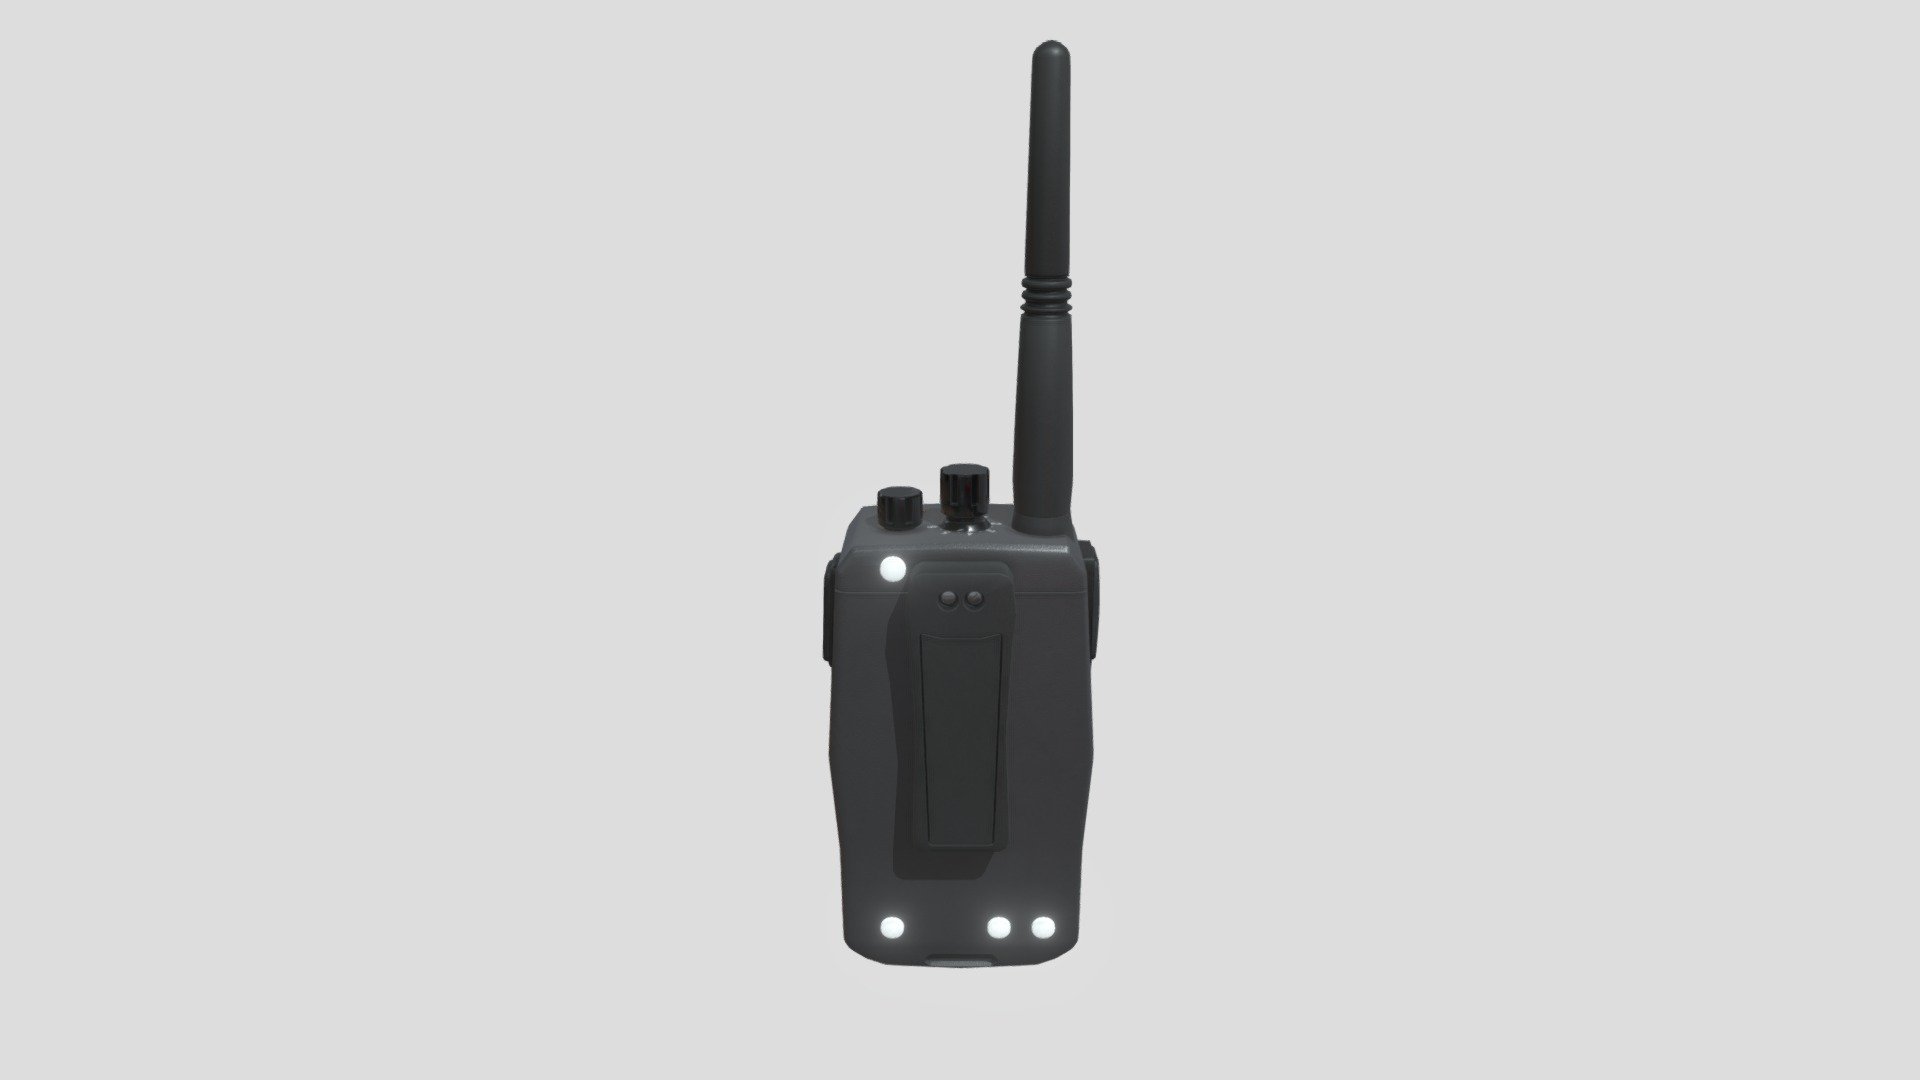 A classic low poly walkie talkie optimized for gaming.
Made with Blender and Subtance Painter
4K textures
Triangulate Faces - Low Poly Walkie Talkies - Download Free 3D model by Artyooooom 3d model